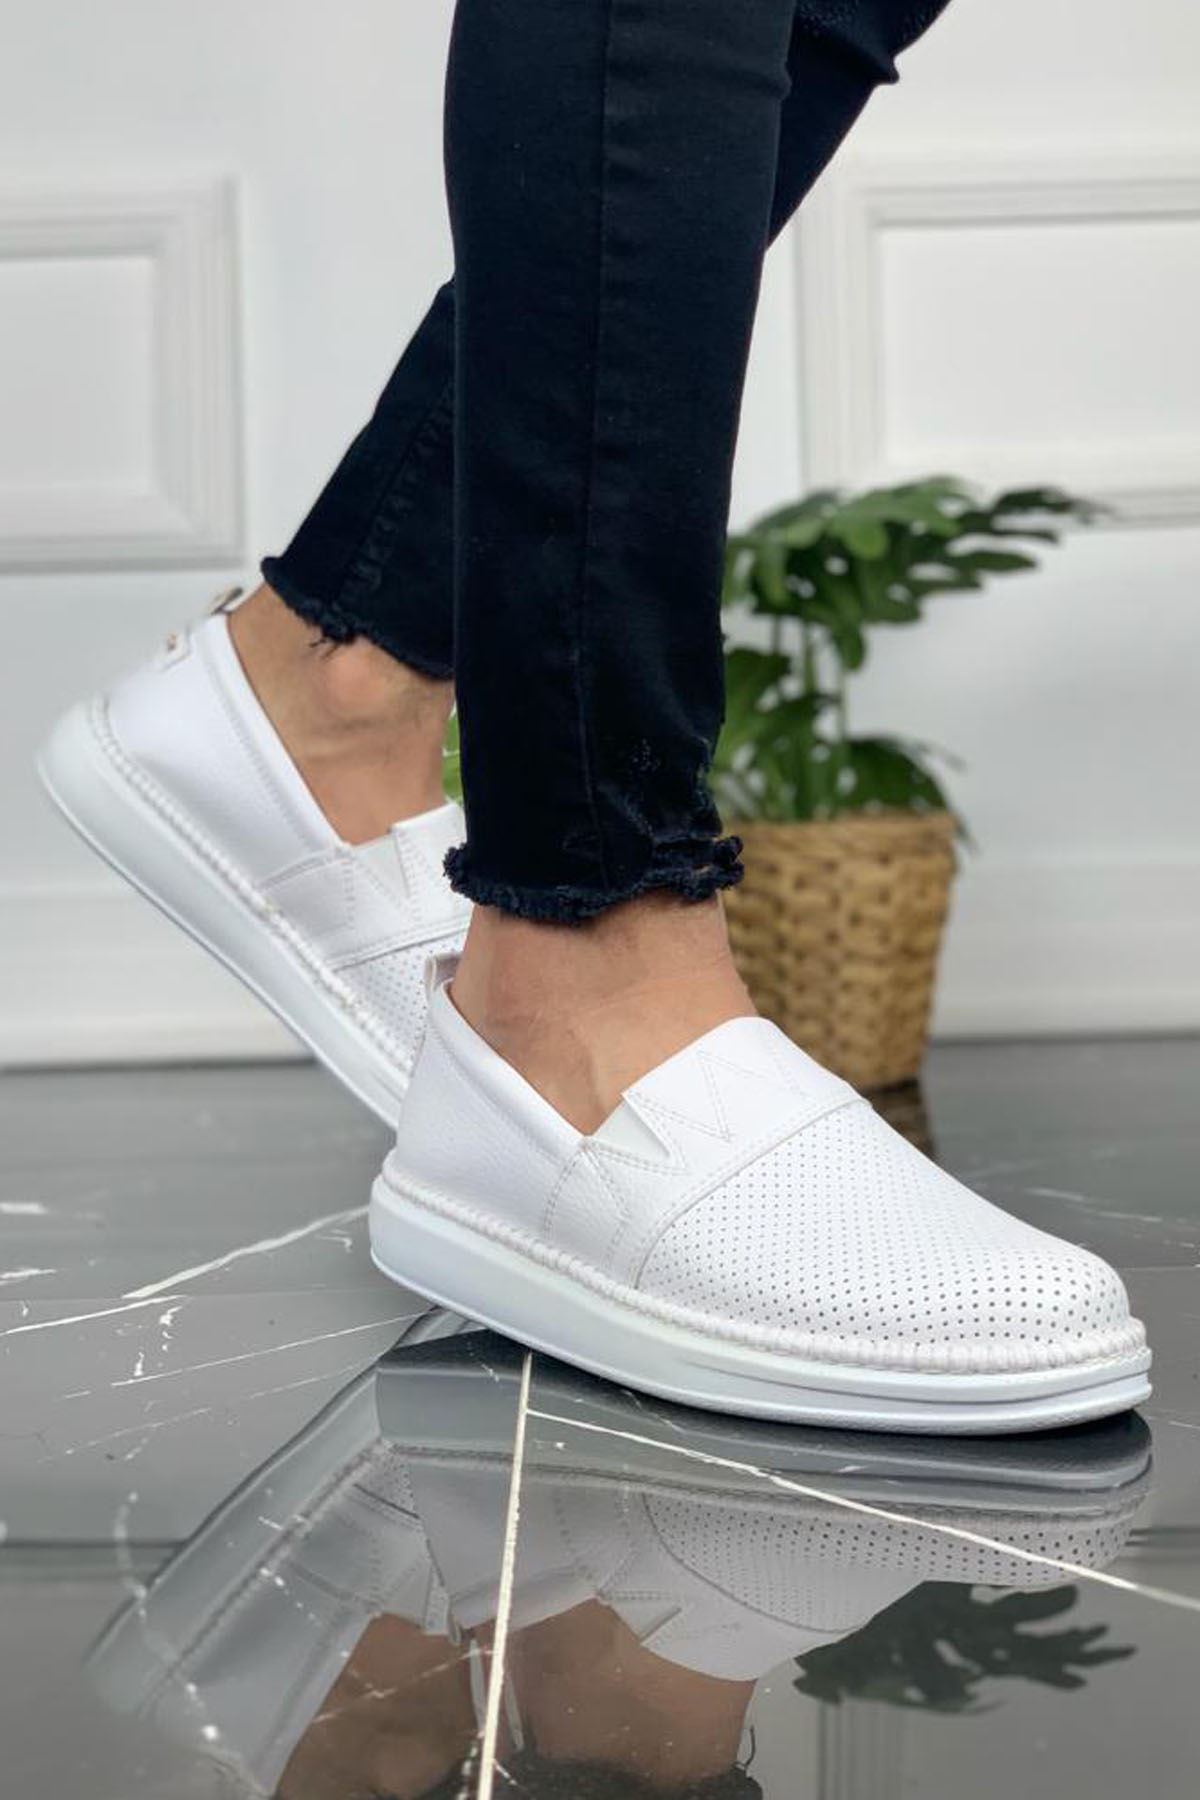 Chekich Men's Shoes White Colors Artificial Leather Slip On Summer Season Sneakers Casual Sport Walking Original Vulcanized Material Breathable Sewing Sole Lightweight Comfortable Footwear Wedding Office Flats CH091 V1